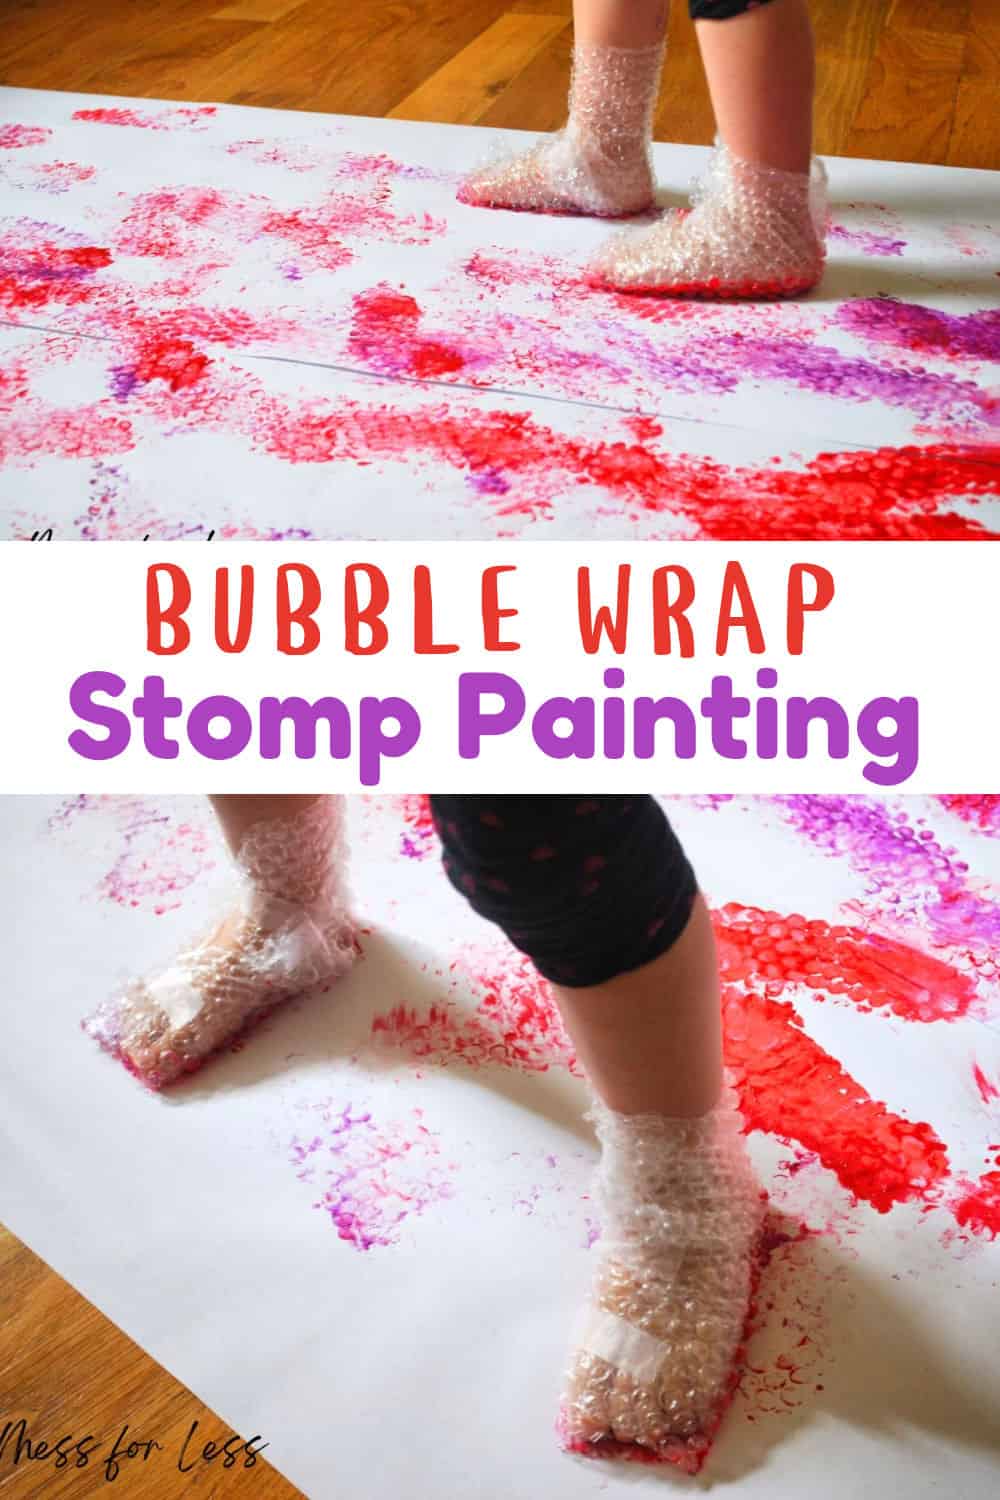 Kids can jump and stomp as they create a masterpiece with bubble wrap stomp painting! A fun way for kids to move their bodies and create art.